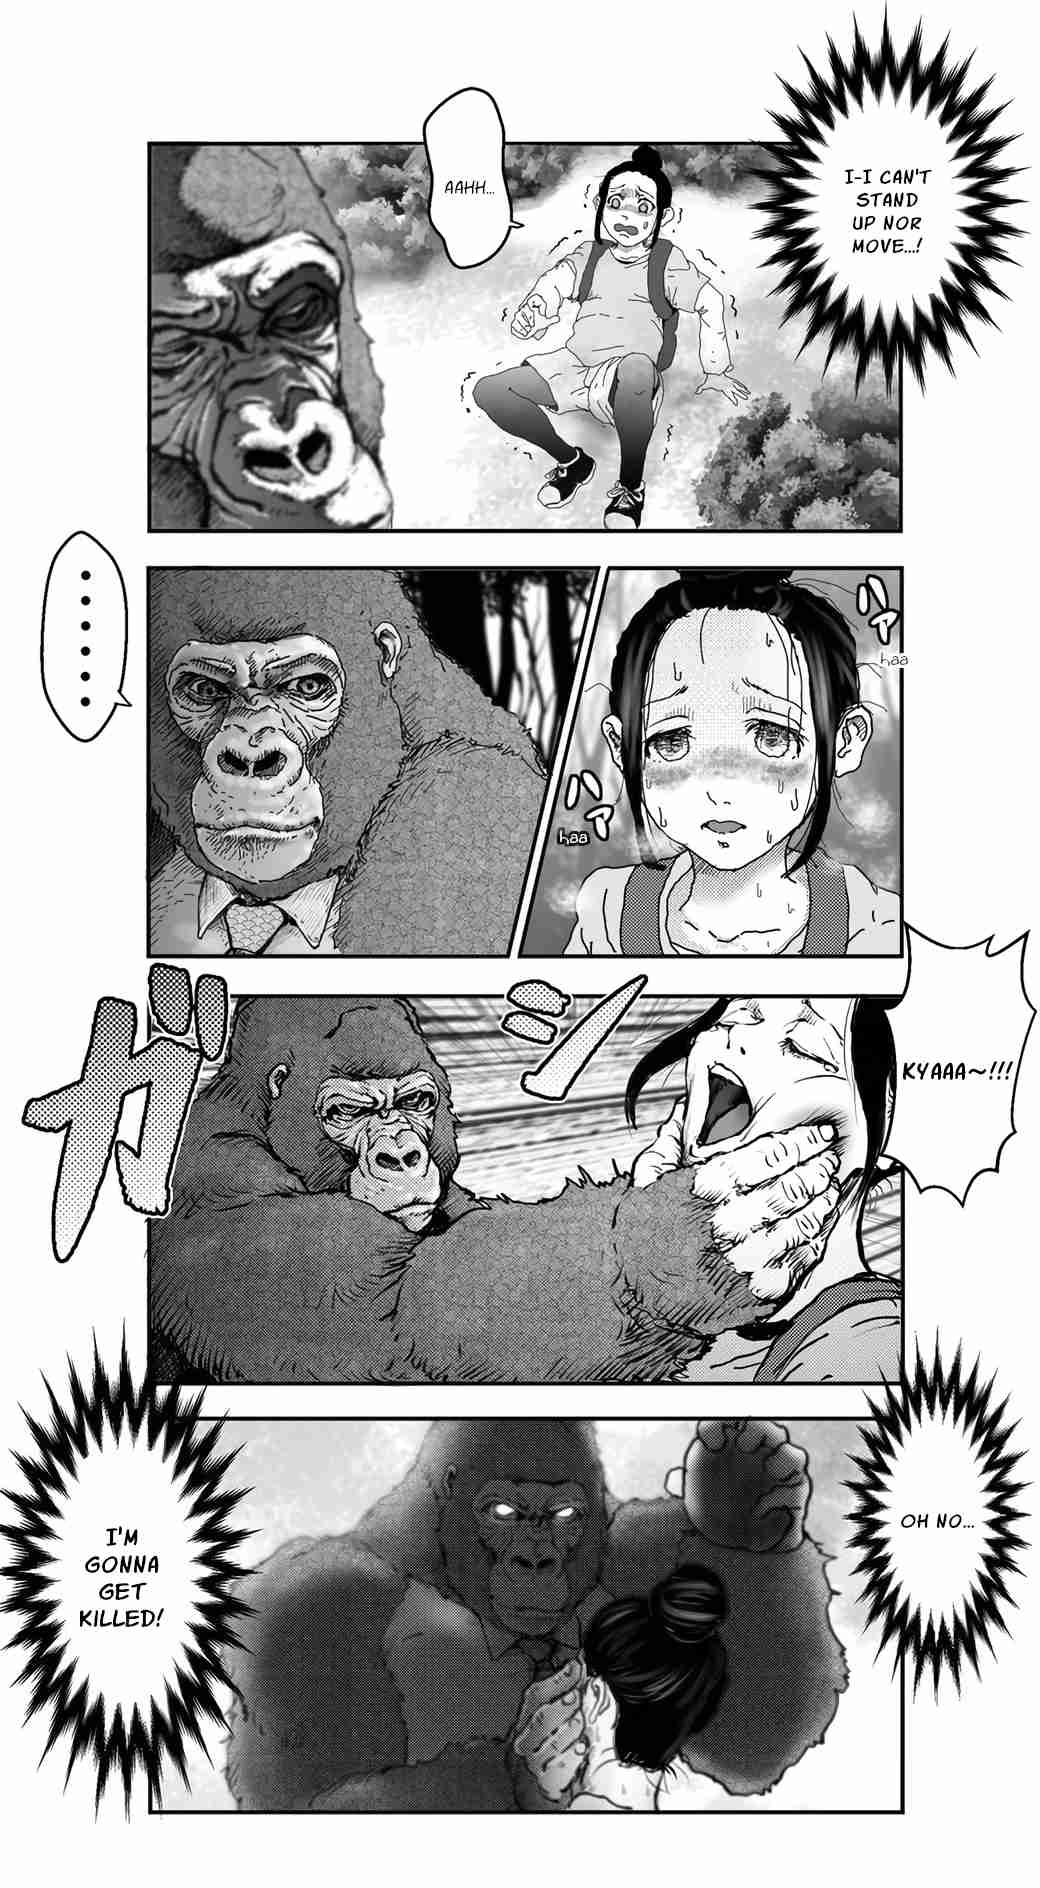 An Extremely Attractive Gorilla Ch. 2 A Damsel in Distress